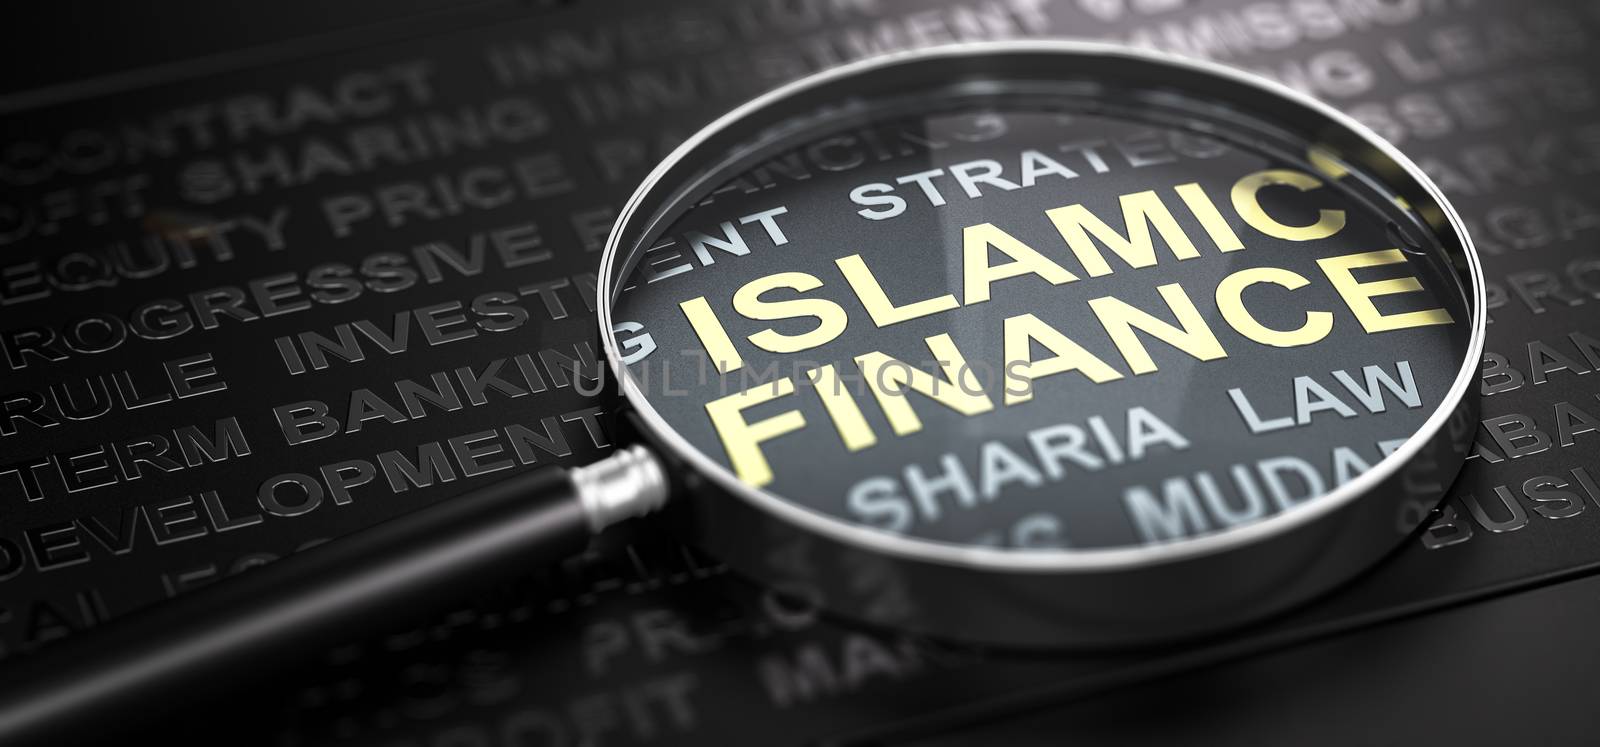 Islamic Finance or Banking. by Olivier-Le-Moal